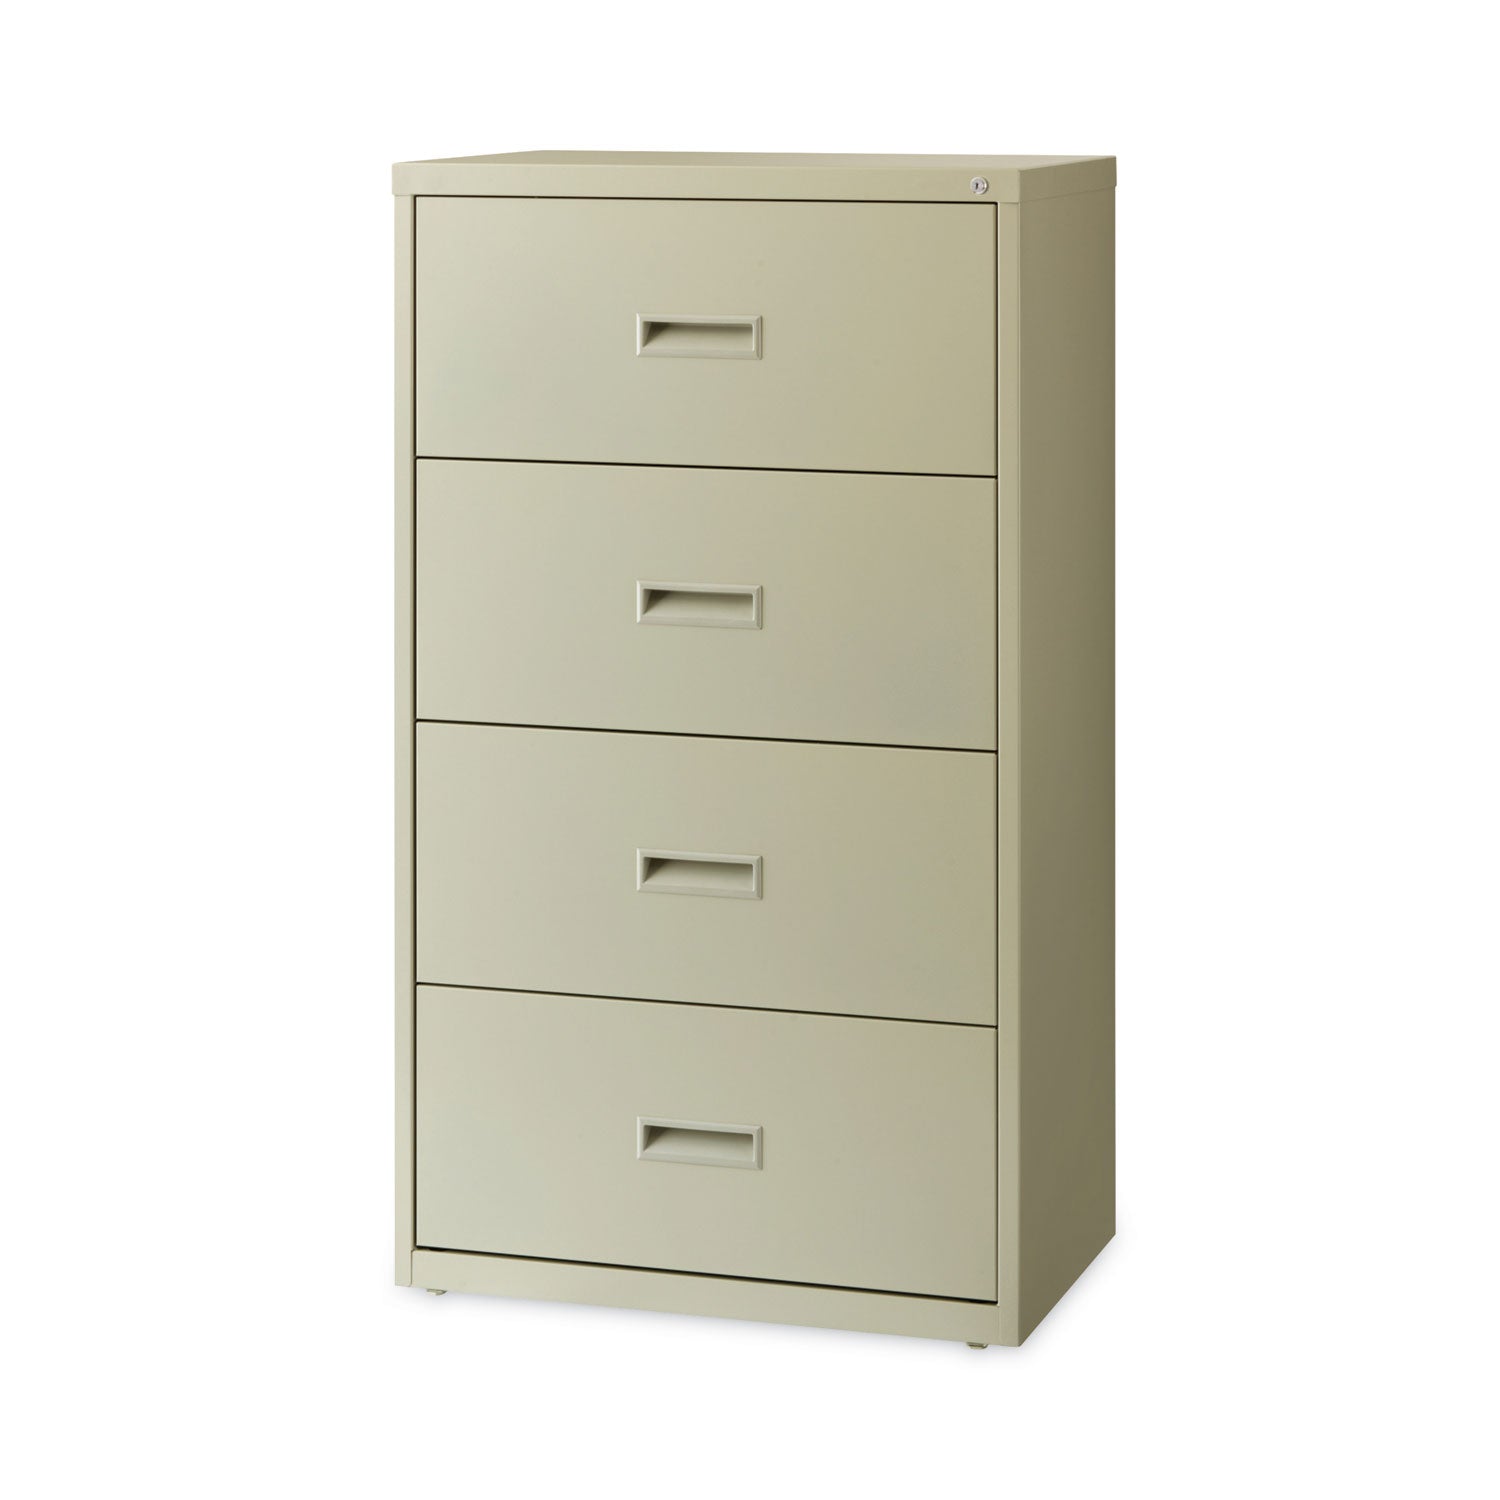 lateral-file-cabinet-4-letter-legal-a4-size-file-drawers-putty-30-x-1862-x-525_hid14956 - 2